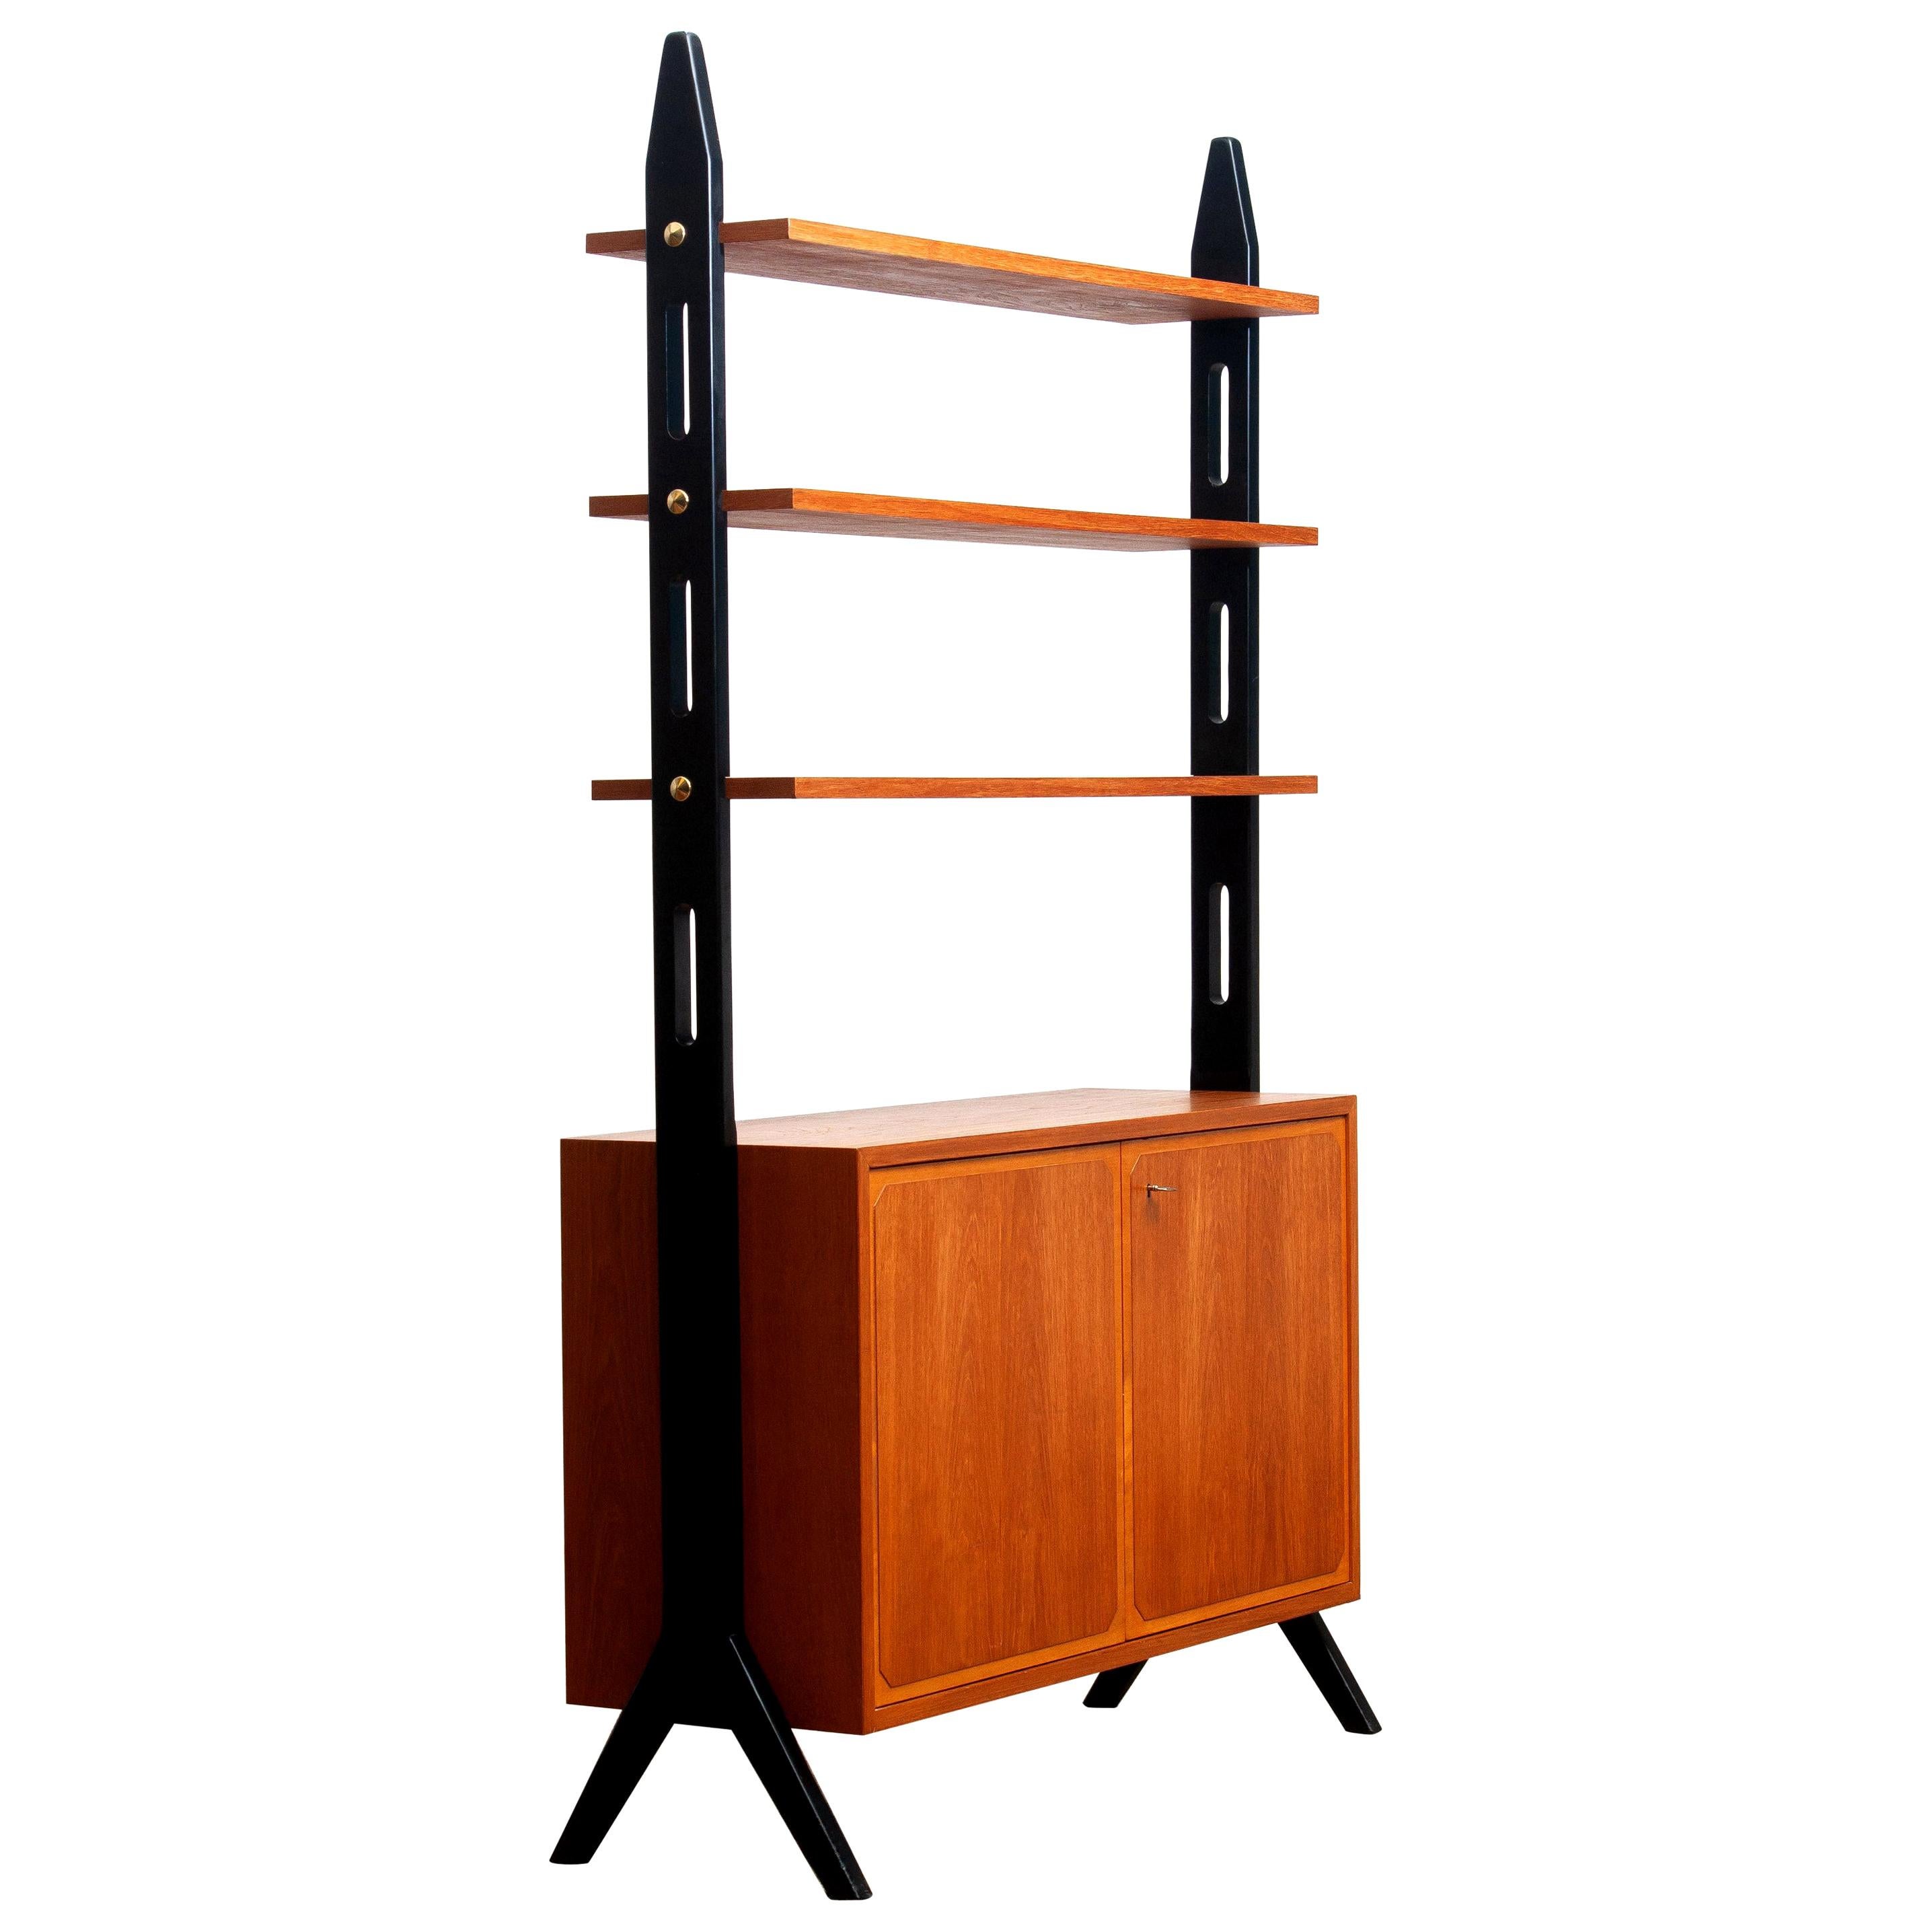 Beautiful Swedish bookcase / room divider / shelf’s made in teak from the 1950s.
Two folding doors, with a lock, inside the cabinet is a shelf that can be adjusted in two positions.
The three top shelf’s are placed in a fixed position.
Overall